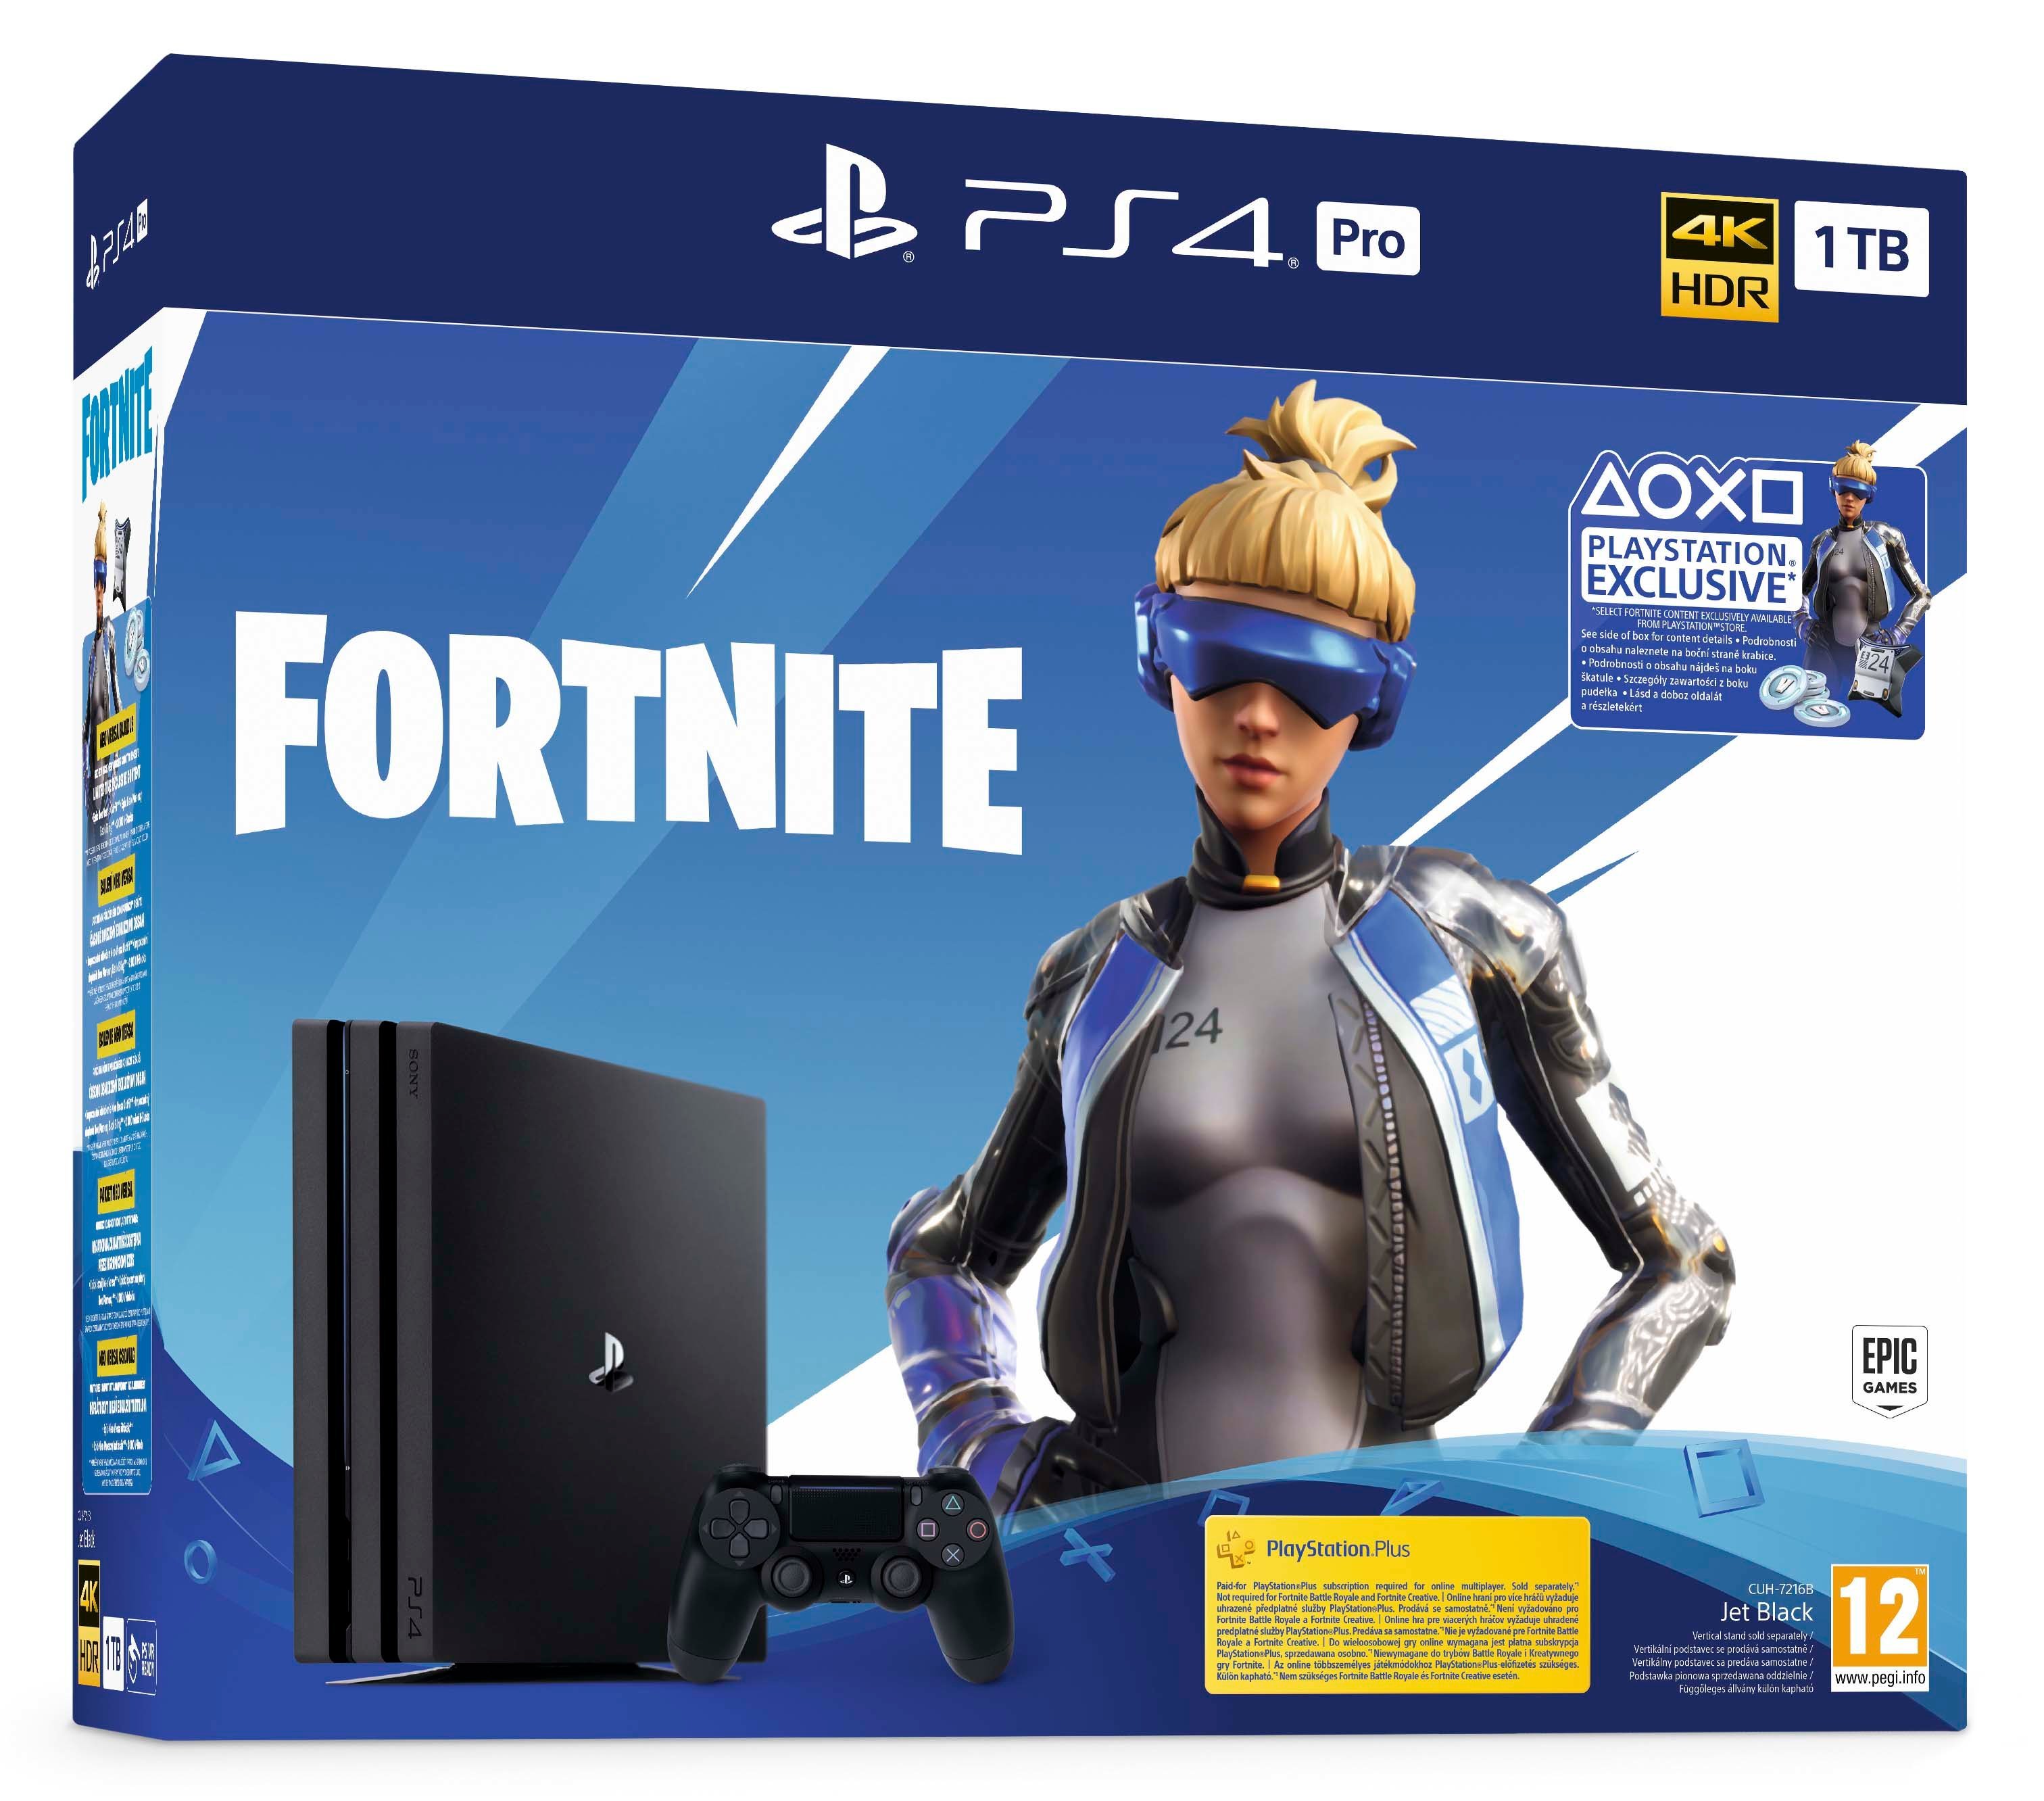 Køb Playstation 4 Pro Console 1 TB (Fornite Code Expired) (Nordic)